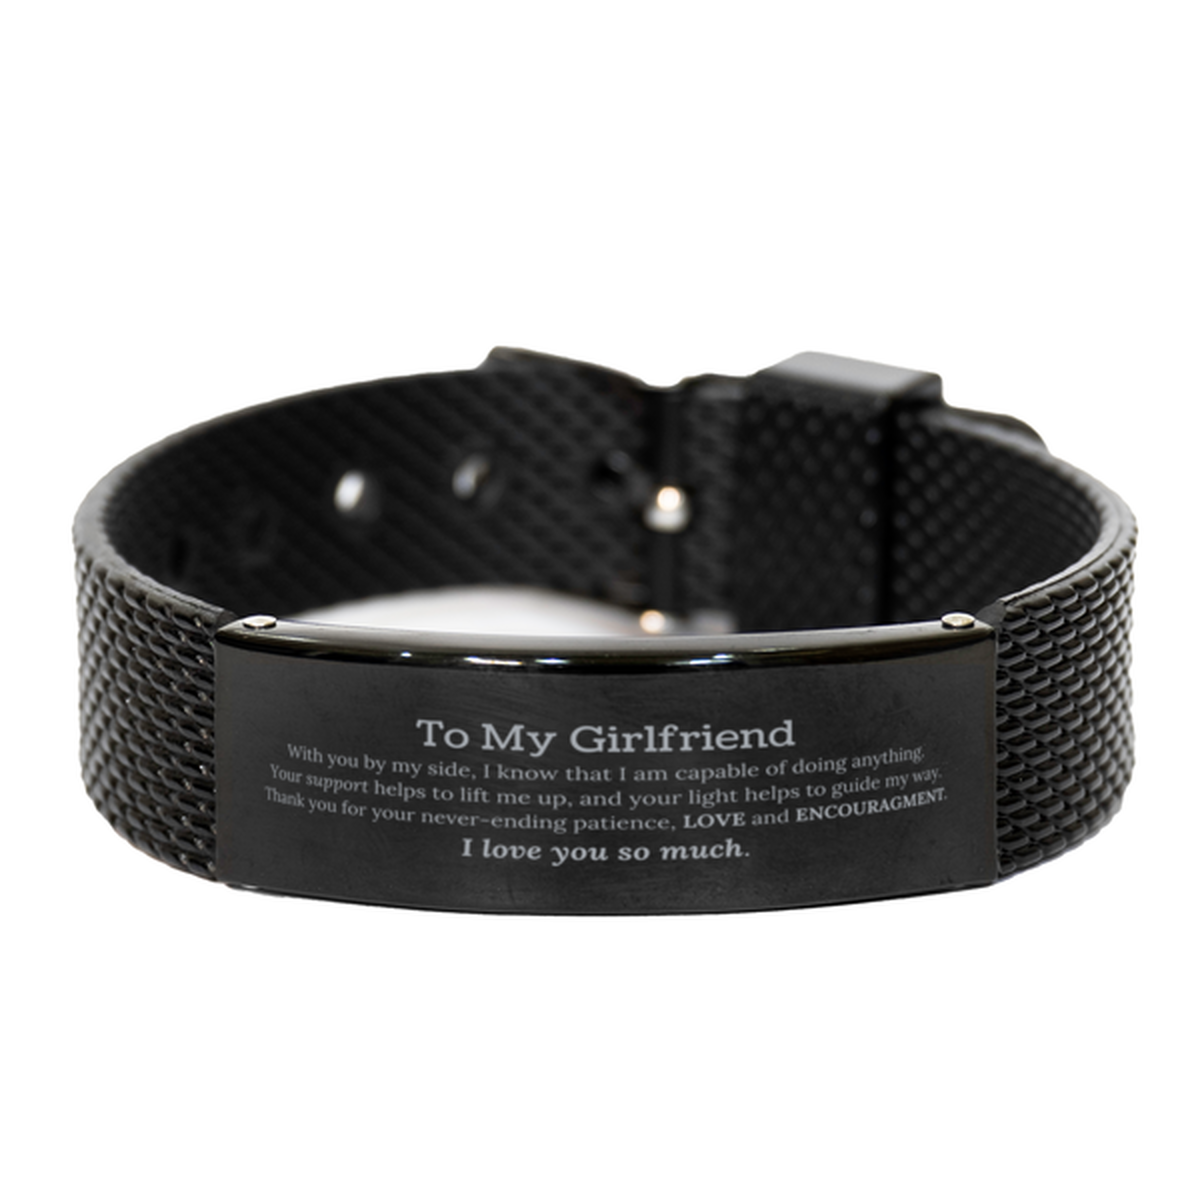 Appreciation Girlfriend Black Shark Mesh Bracelet Gifts, To My Girlfriend Birthday Christmas Wedding Keepsake Gifts for Girlfriend With you by my side, I know that I am capable of doing anything. I love you so much